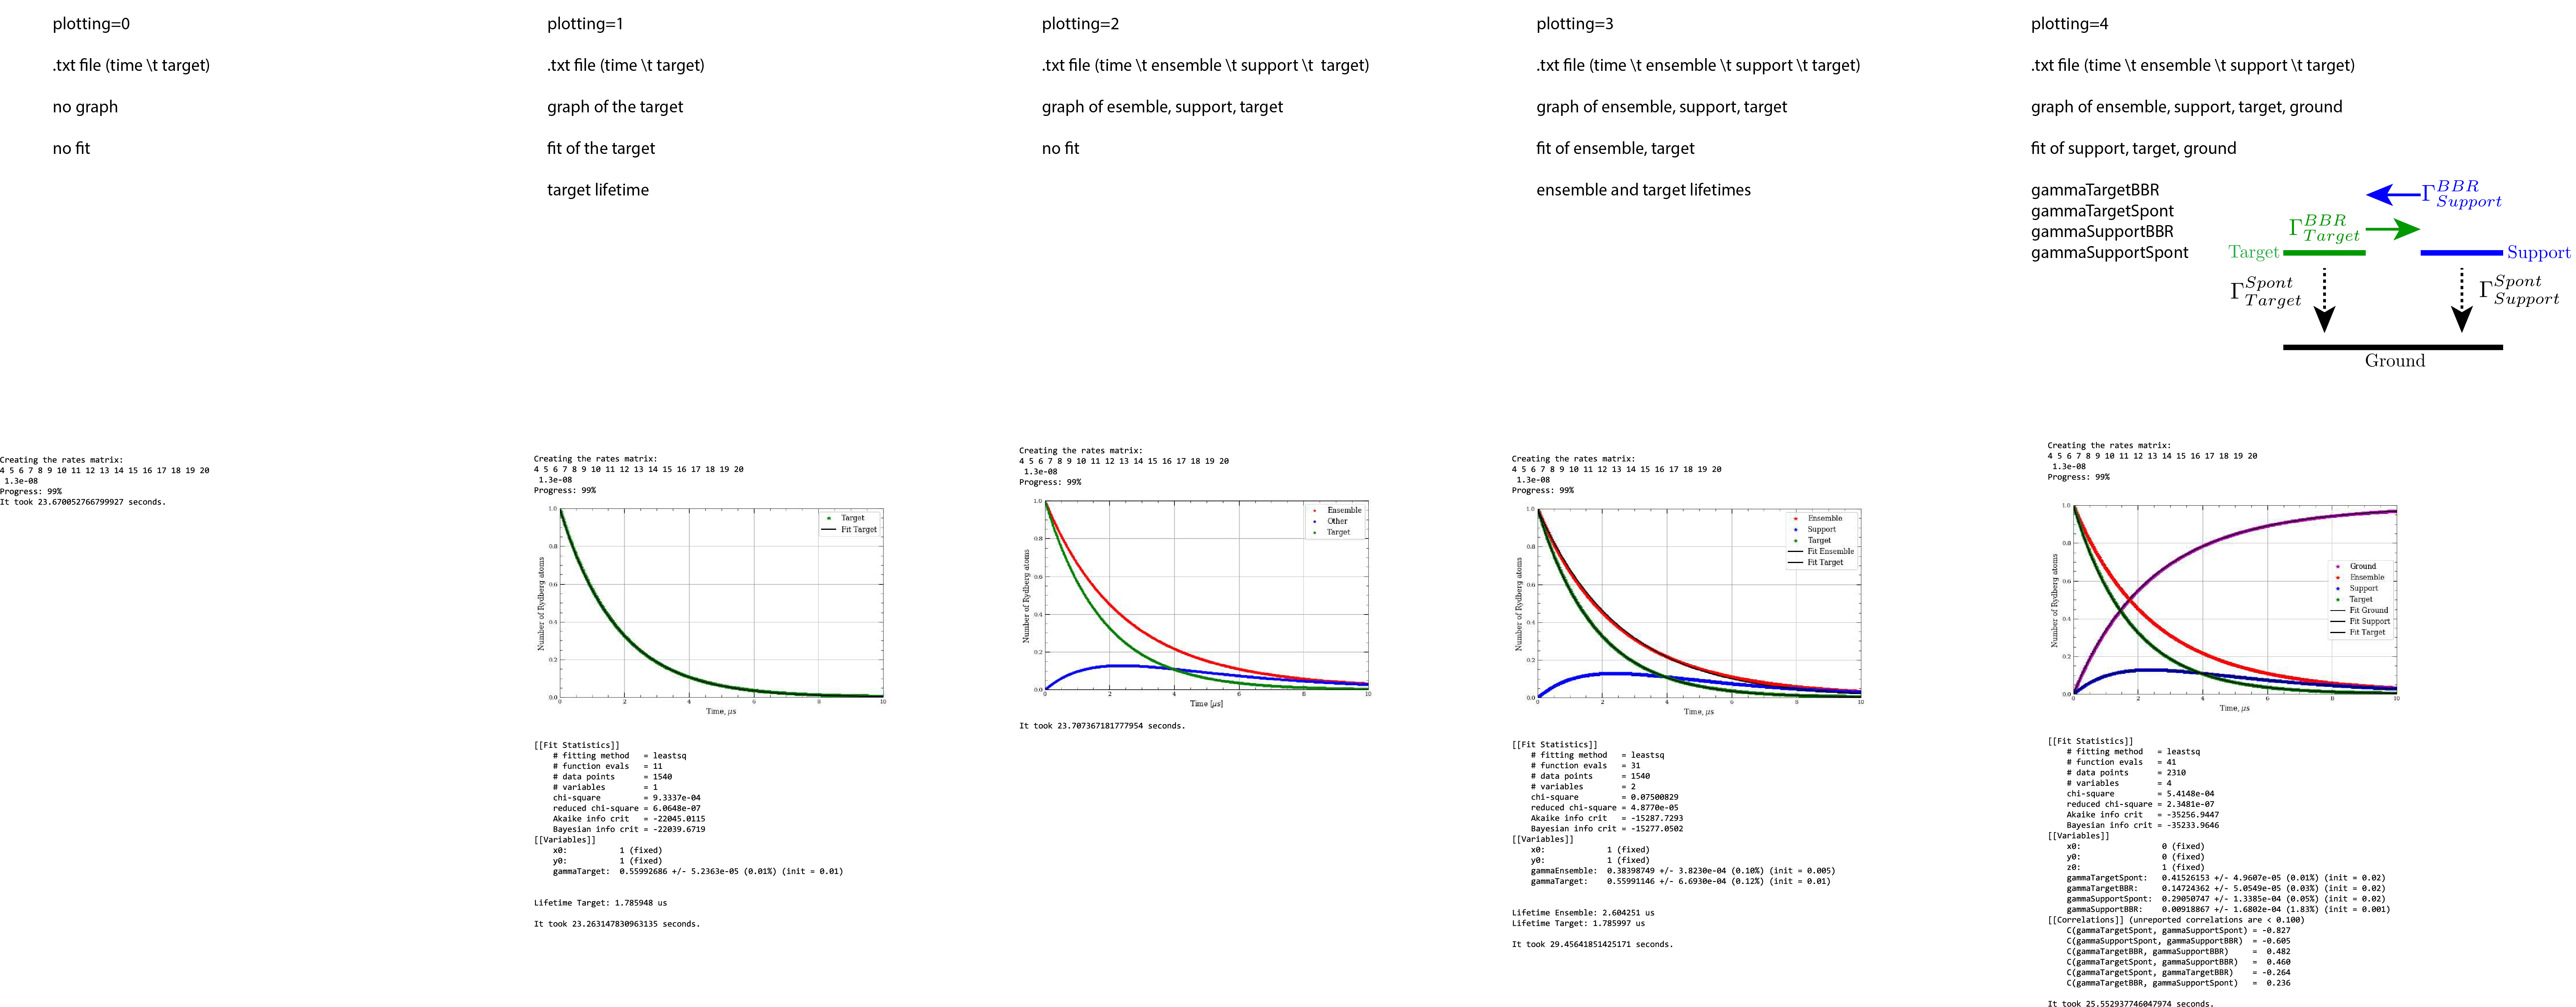 overview of results  with different plotting parameter settings